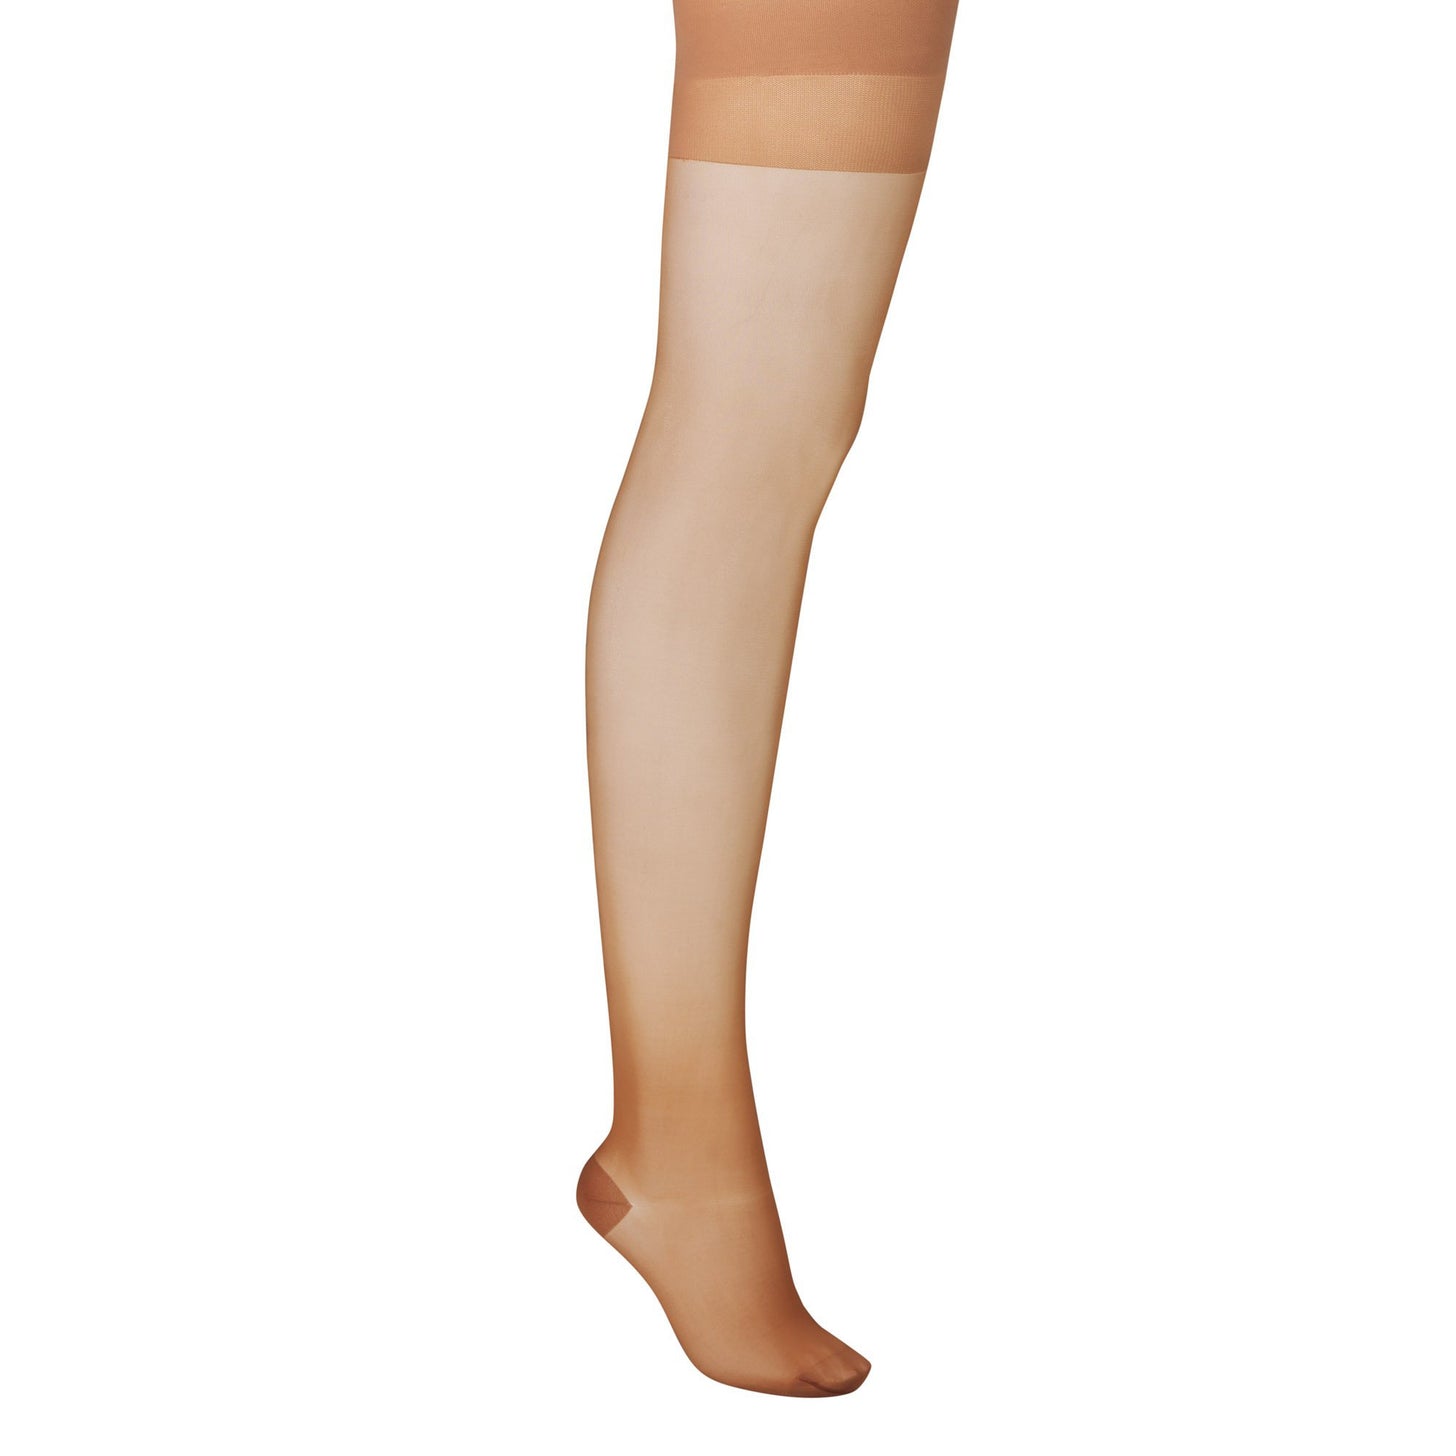 Wolford Individual 10 Denier Tights Sheer Pantyhose For Women Luxurious  Comfort Perfect Fit Hosiery for Every Occasion